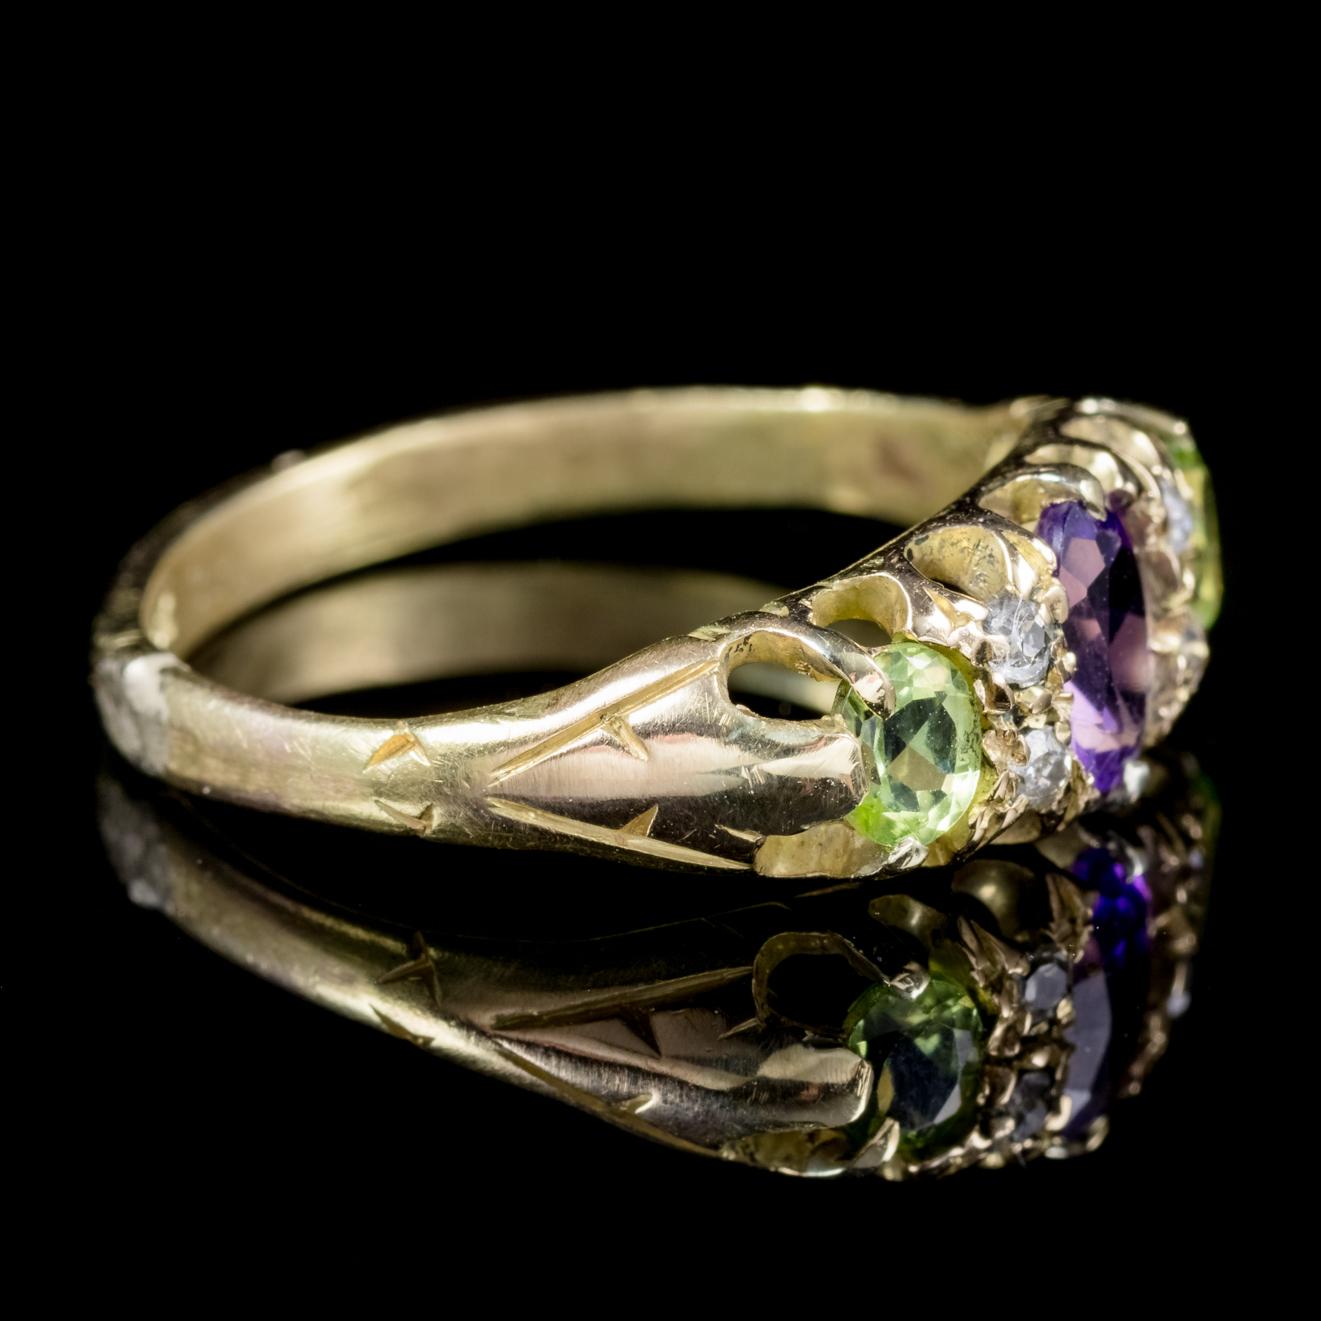 Antique Victorian Diamond Amethyst Peridot Suffragette Ring 18 Carat Gold In Good Condition For Sale In Lancaster, Lancashire